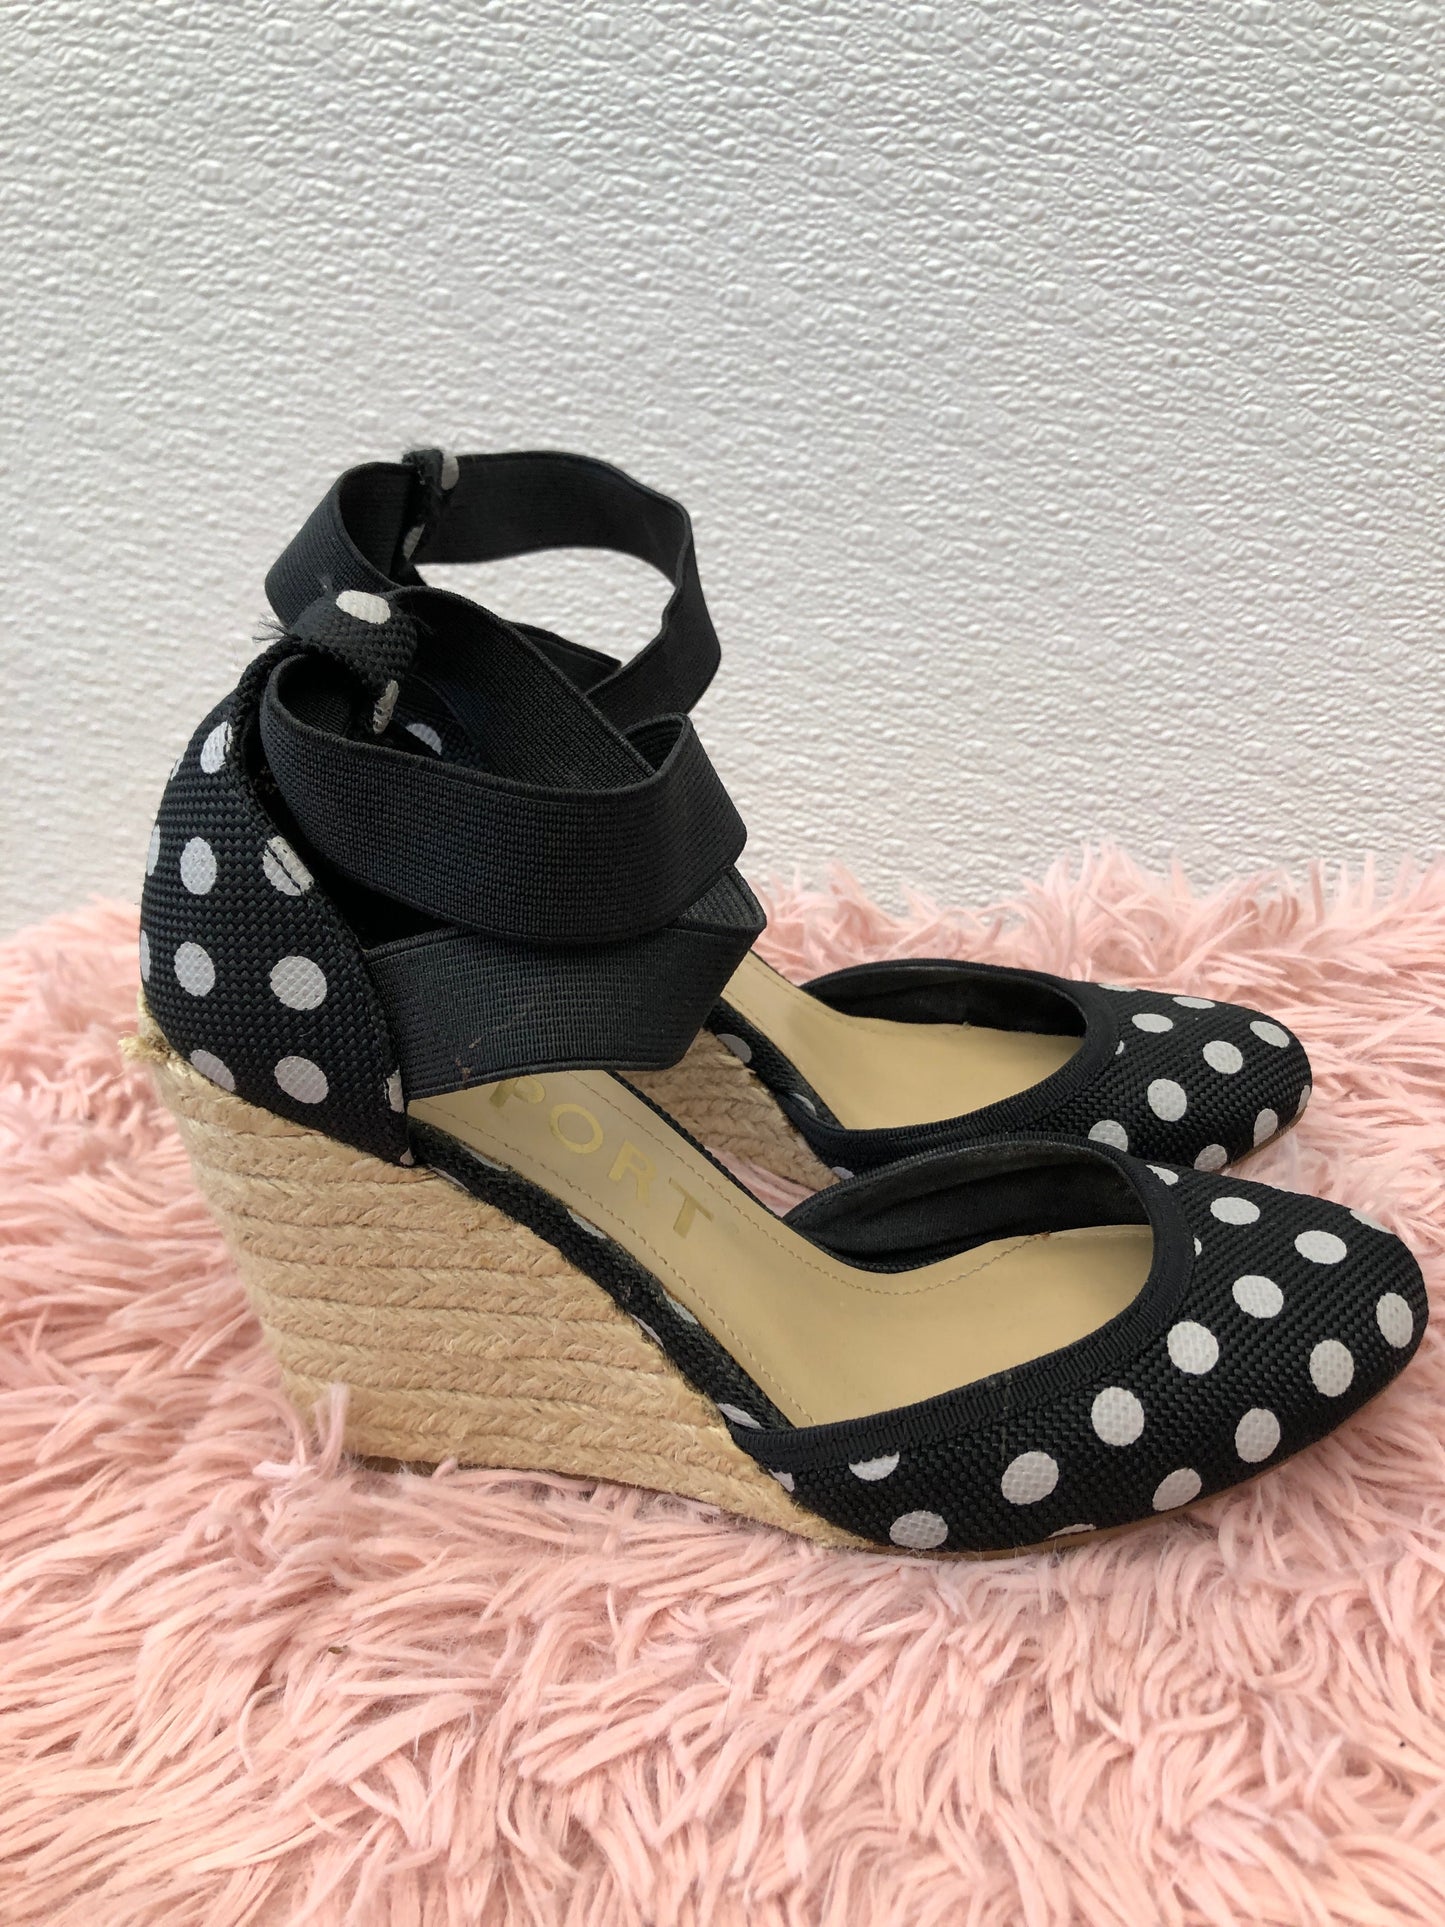 Polkadot Shoes Heels Espadrille Wedge Report, Size 6